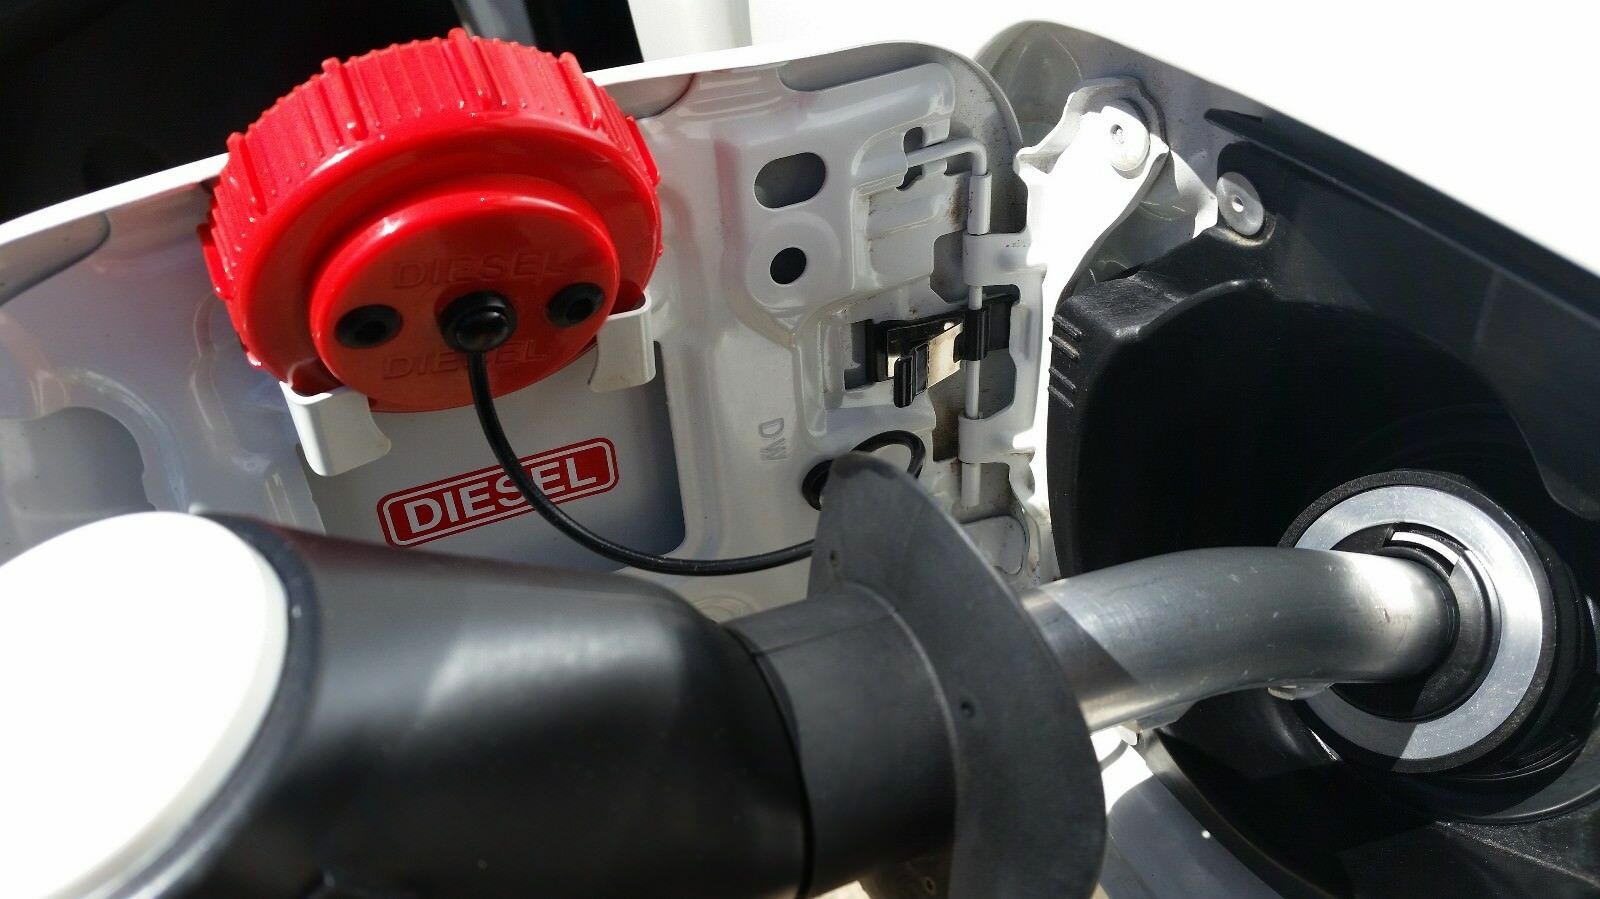 Diesel Fill - Misfuelling Prevention Device - Don't put the wrong fuel in you vehicle - Specialist Tools Australia